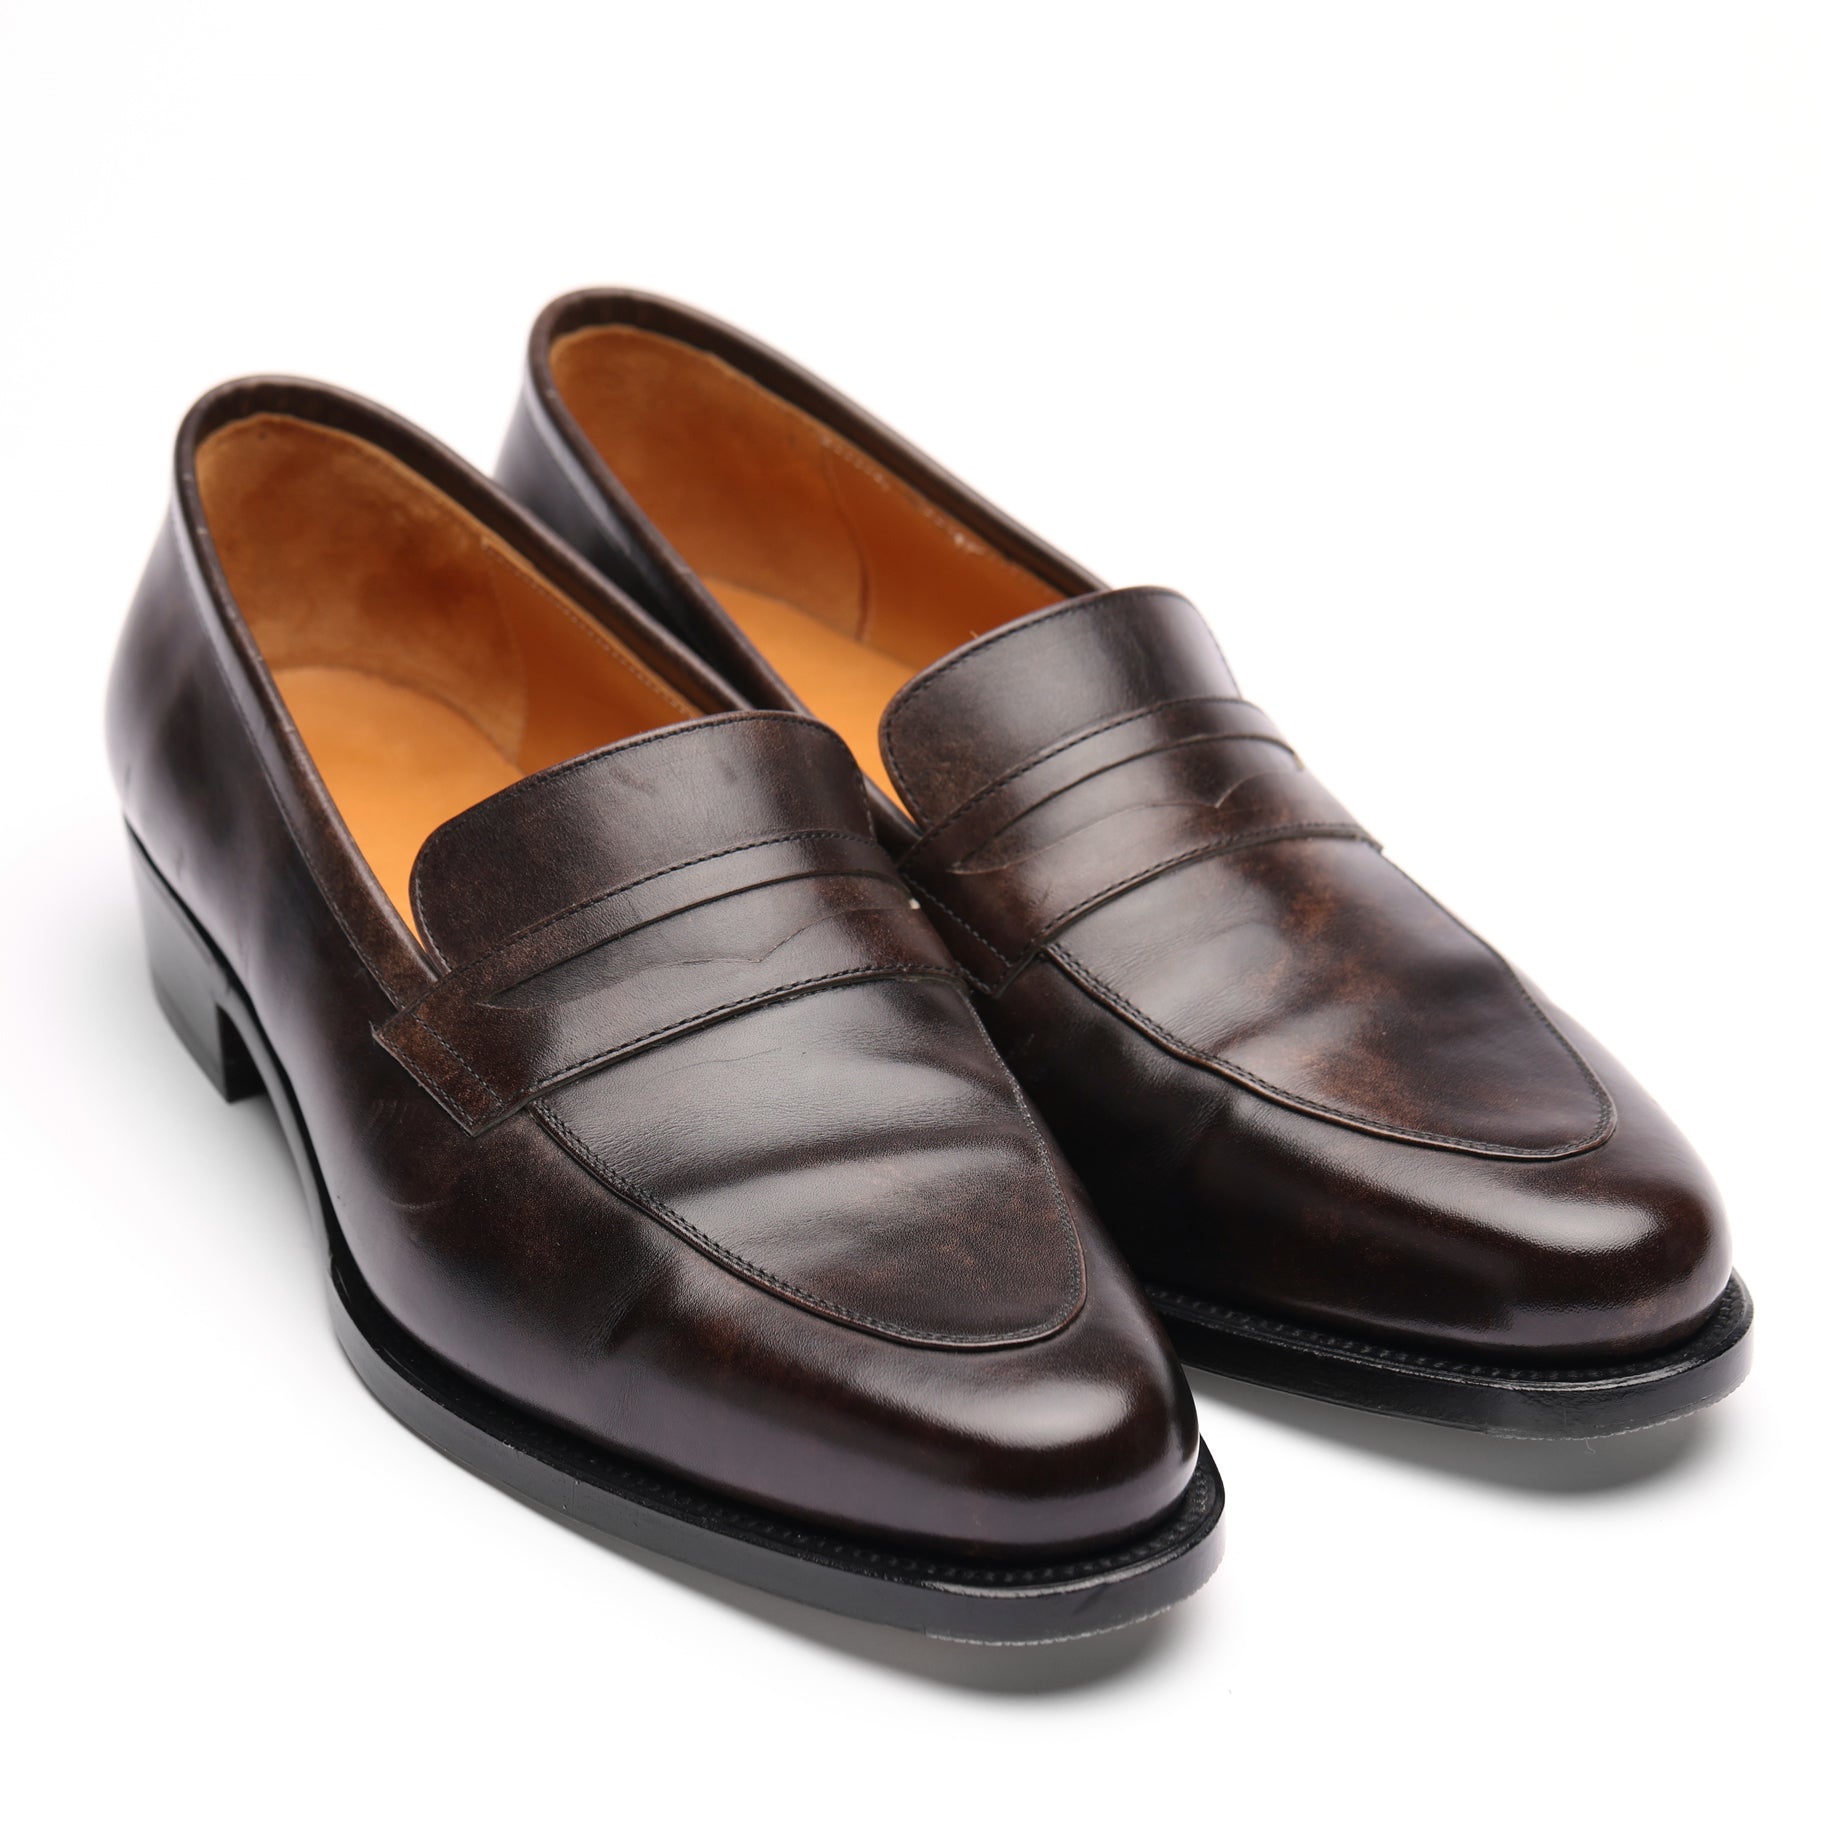 [men's] penny loafers - brown